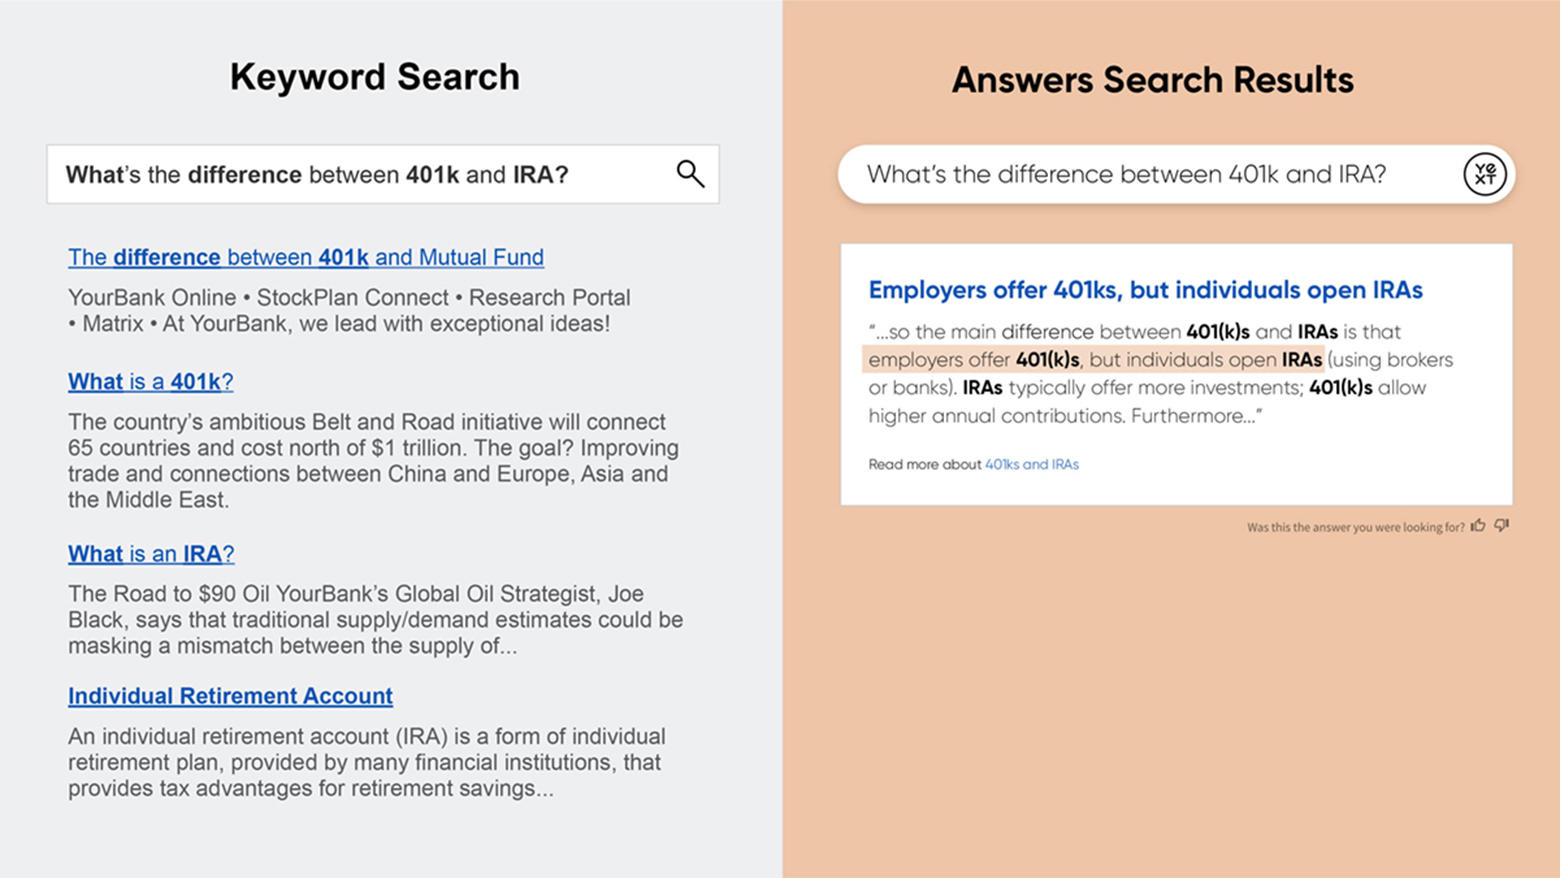 Keyword search results v Answer Search results